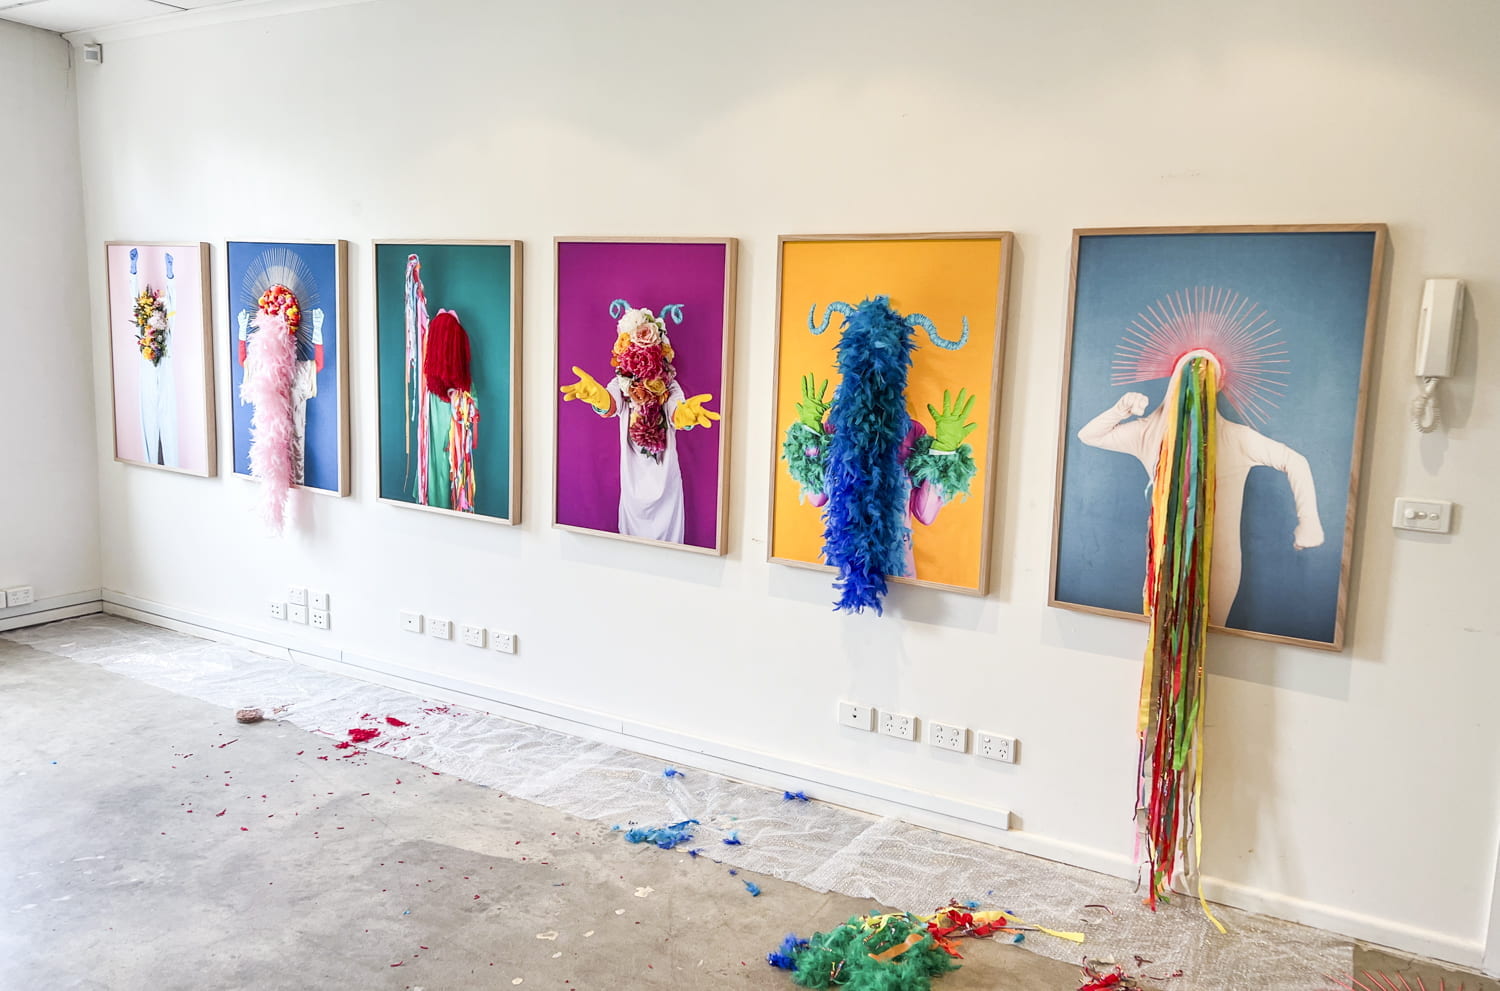 six framed artworks hanging on a wall. Each artwork depicts a figure wearing different colourful costume that includes a headdress and covers the face. elements of the costume, such as feathers and fake flowers, have been attached to the surface of each artwork.